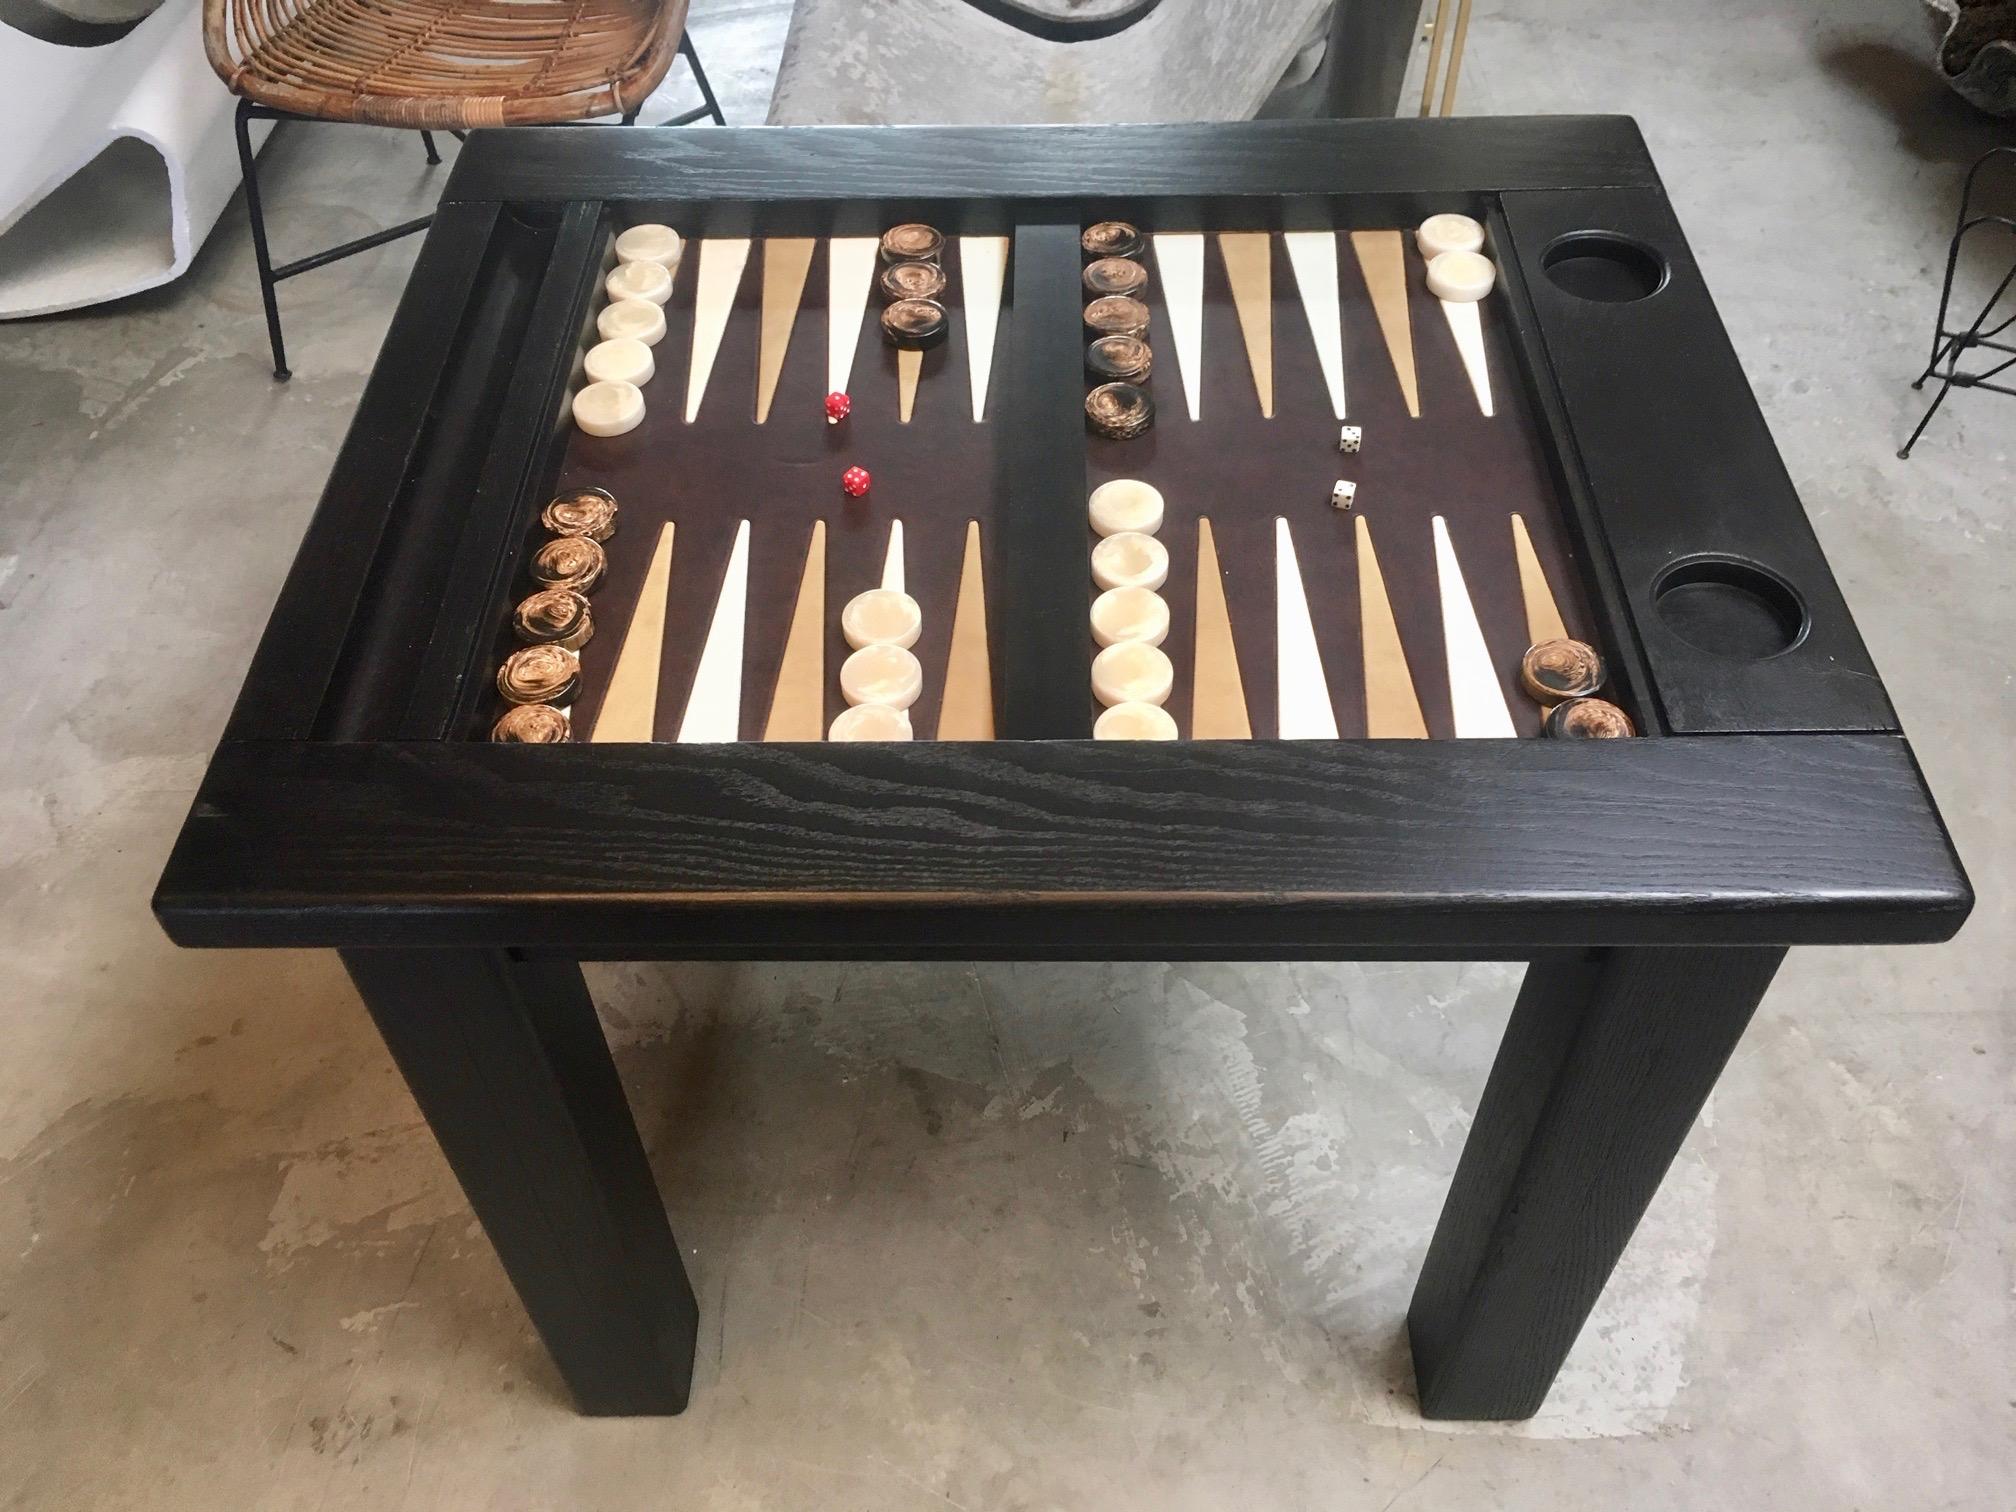 Classic wood backgammon table with leather top. Oak frame and inset leather game board. Slot for backgammon pips on one side and two inset cup holders on the other. Perfect size. Great vintage condition. Vintage backgammon pieces included with sale.